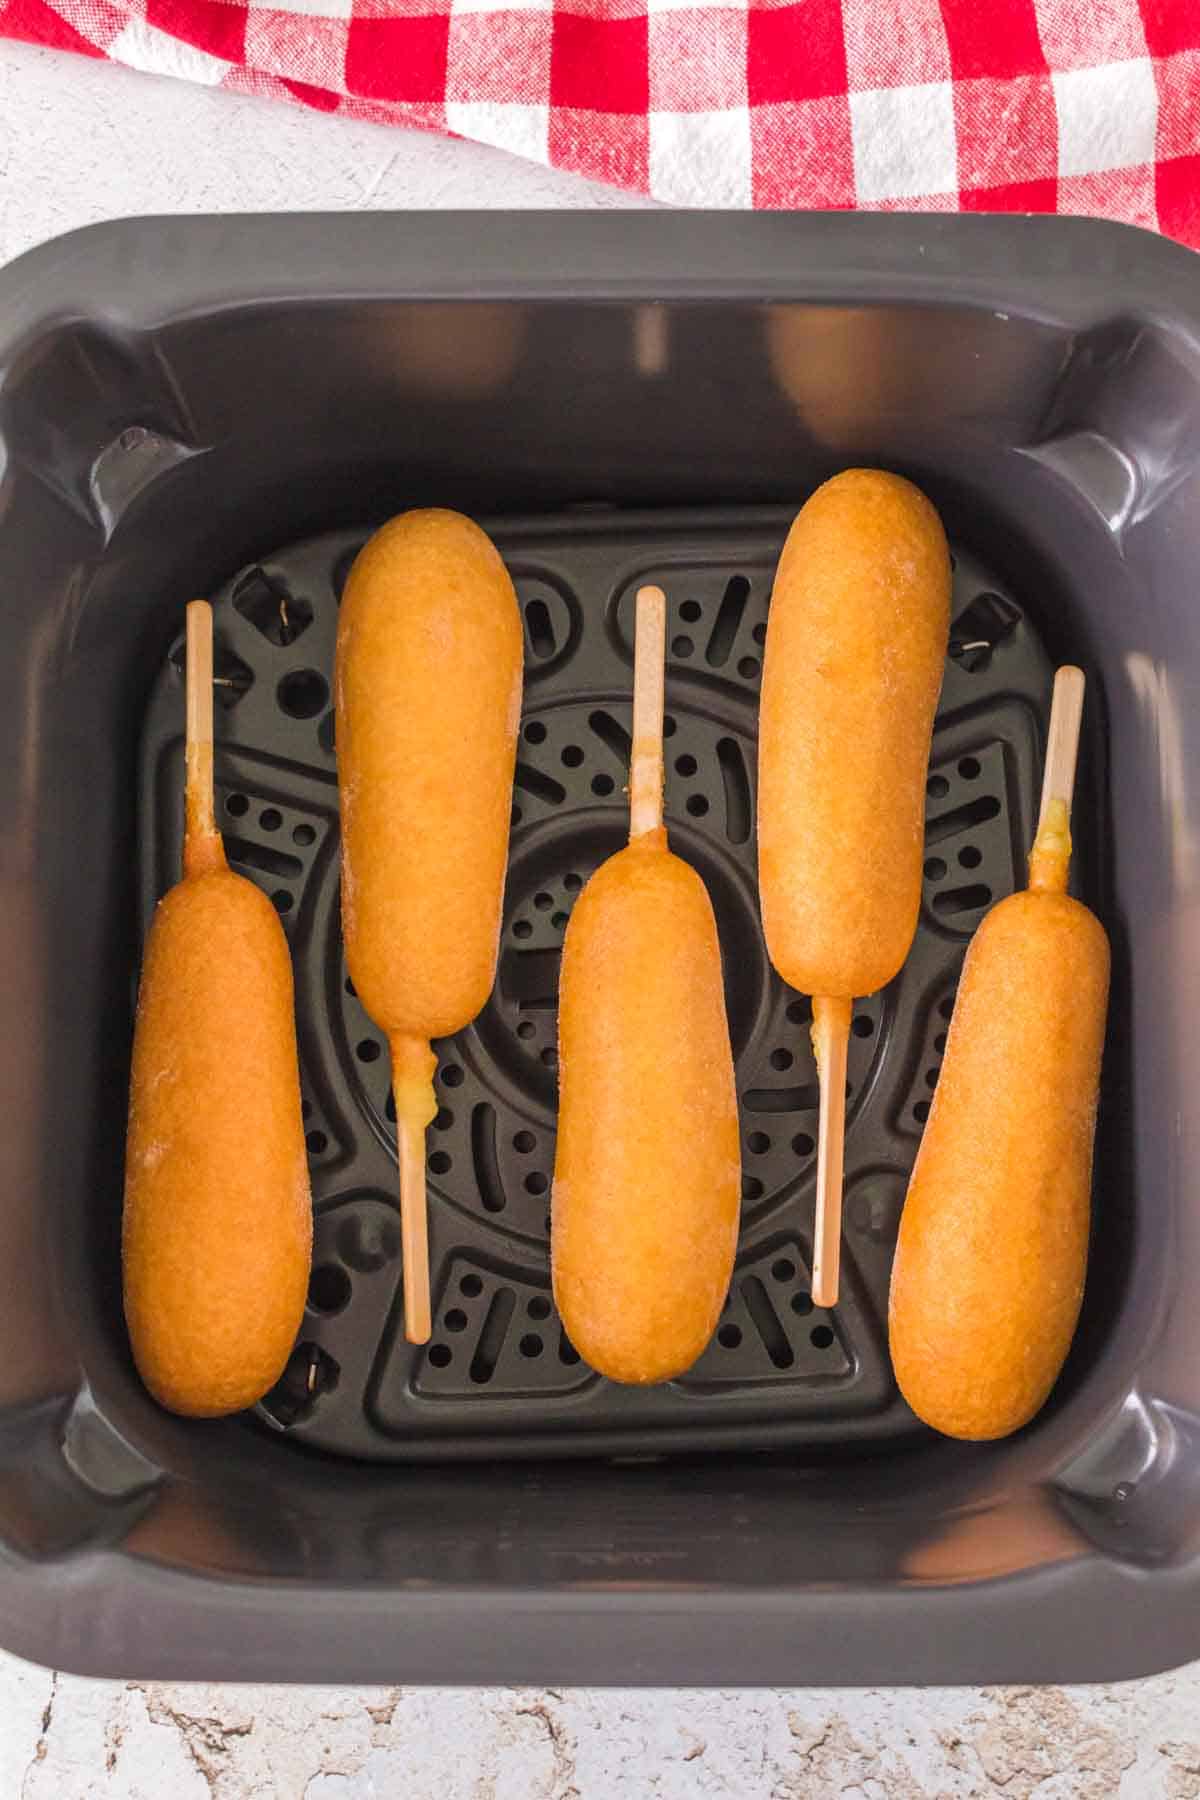 air fryer corn dogs lined up on in the basket